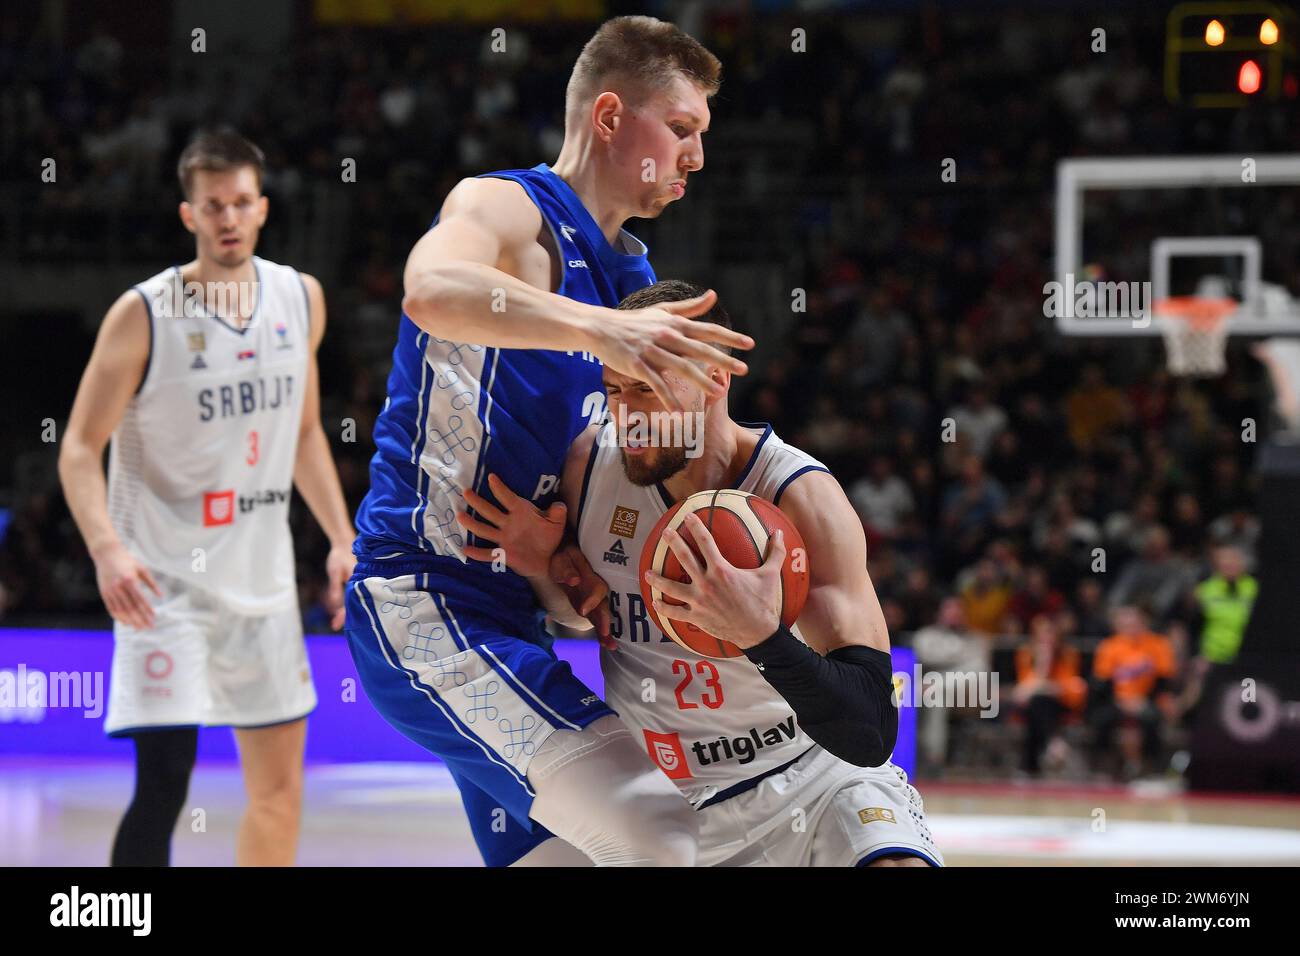 Belgrade, Serbia, 23 February, 2023. Marko Guduric of Serbia competes against Alexander Madsen of Finland during the EuroBasket 2025 Qualifiers match between Serbia and Finland at Aleksandar Nikolic in Belgrade, Serbia. February 23, 2023. Credit: Nikola Krstic/Alamy Stock Photo